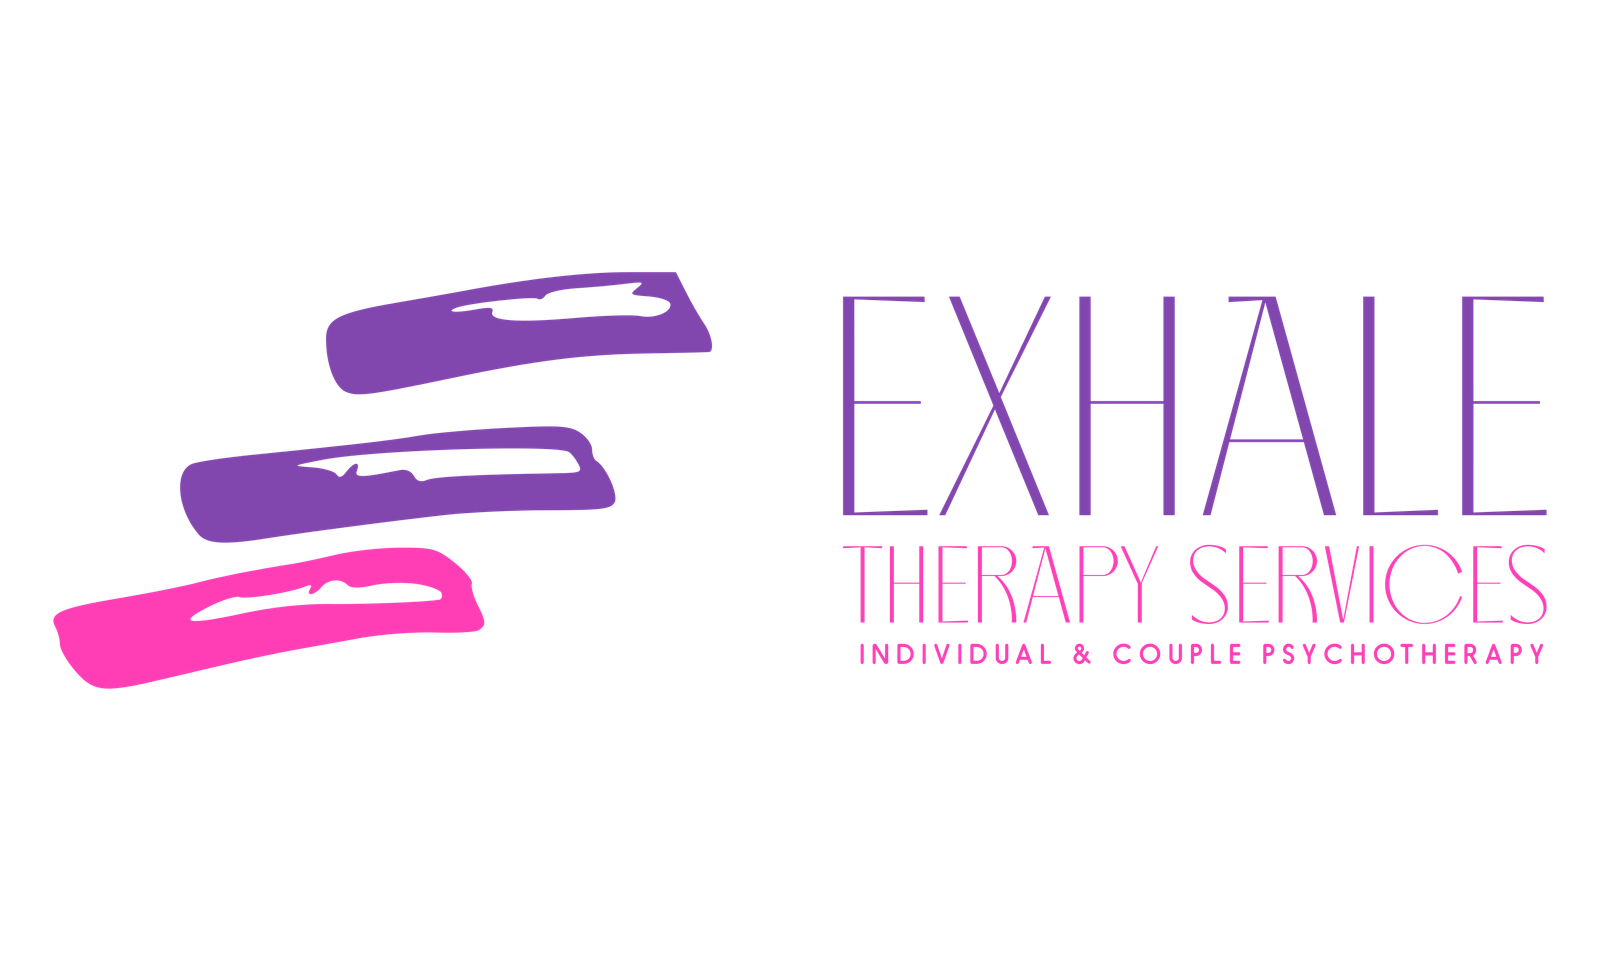 Exhale psychotherapy services in Oakville, Ontario